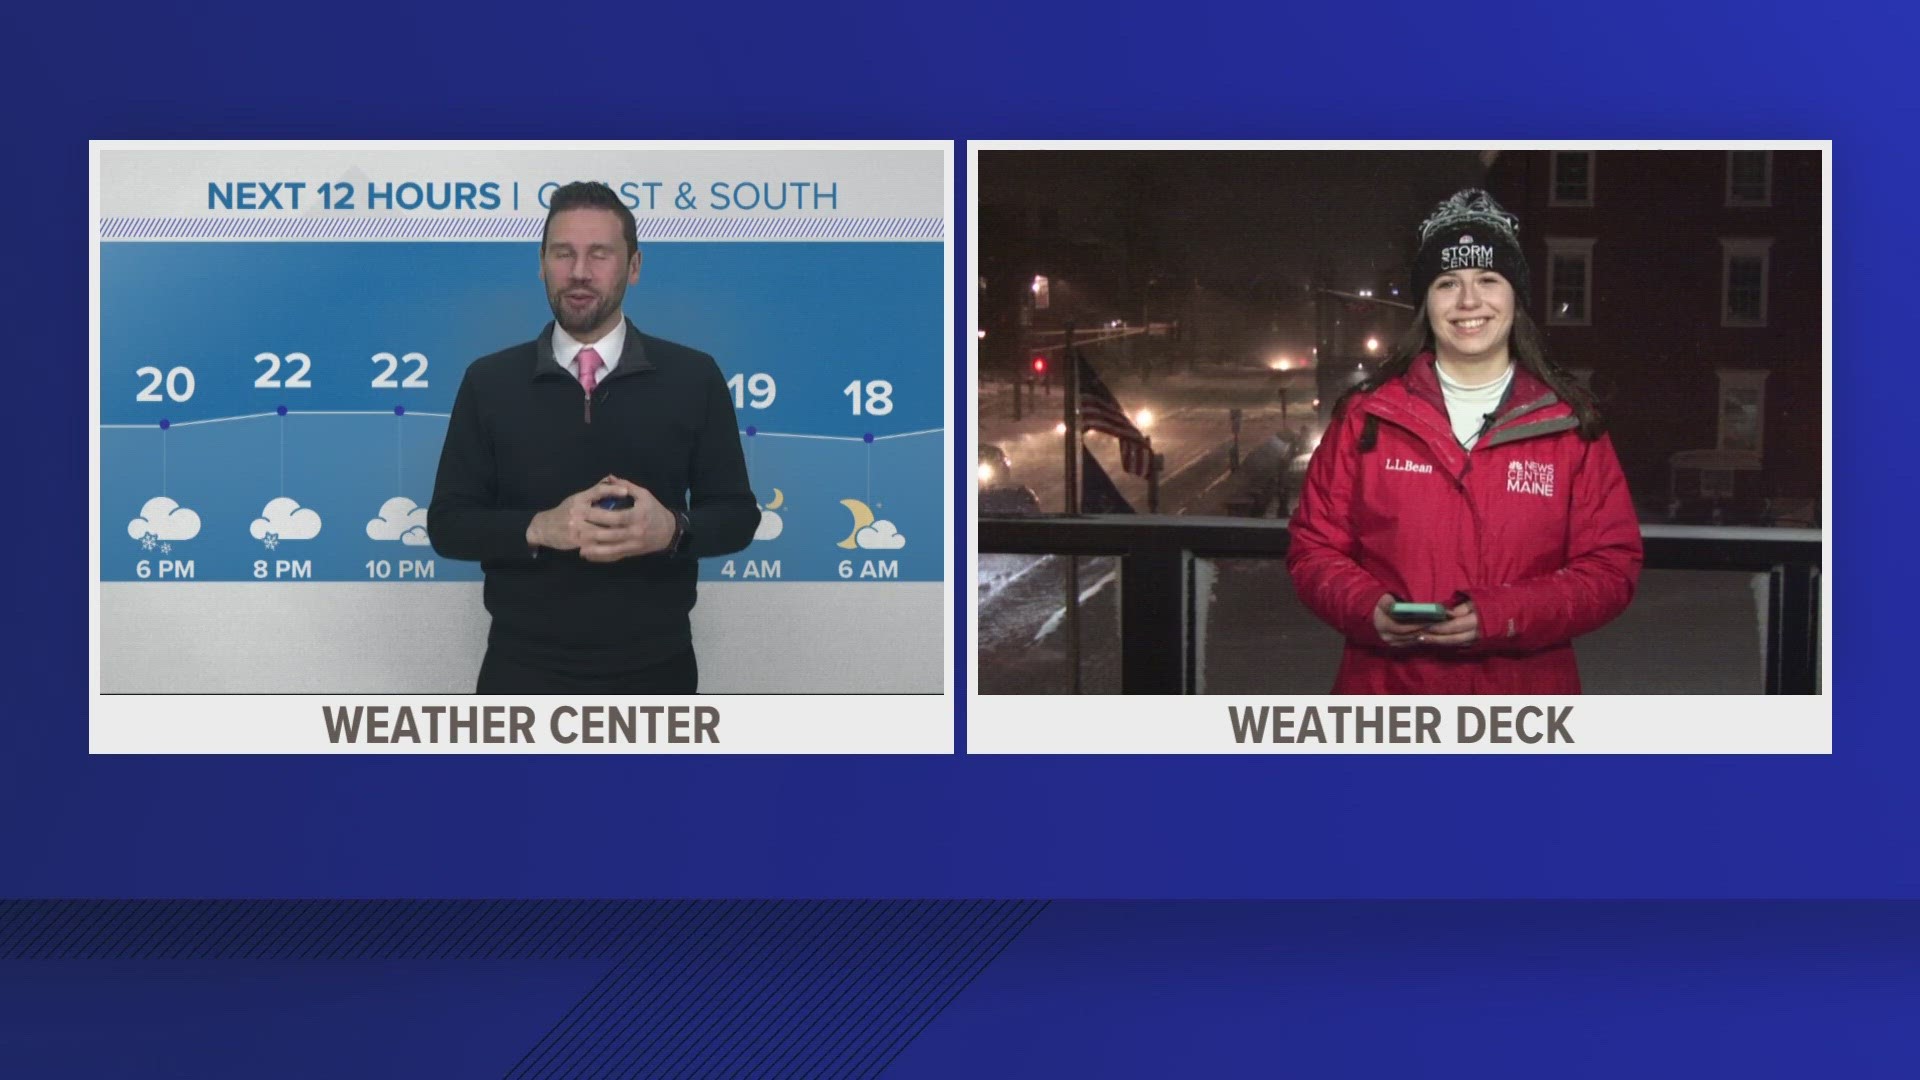 Check out NEWS CENTER Maine's STORM CENTER update for Sunday night.